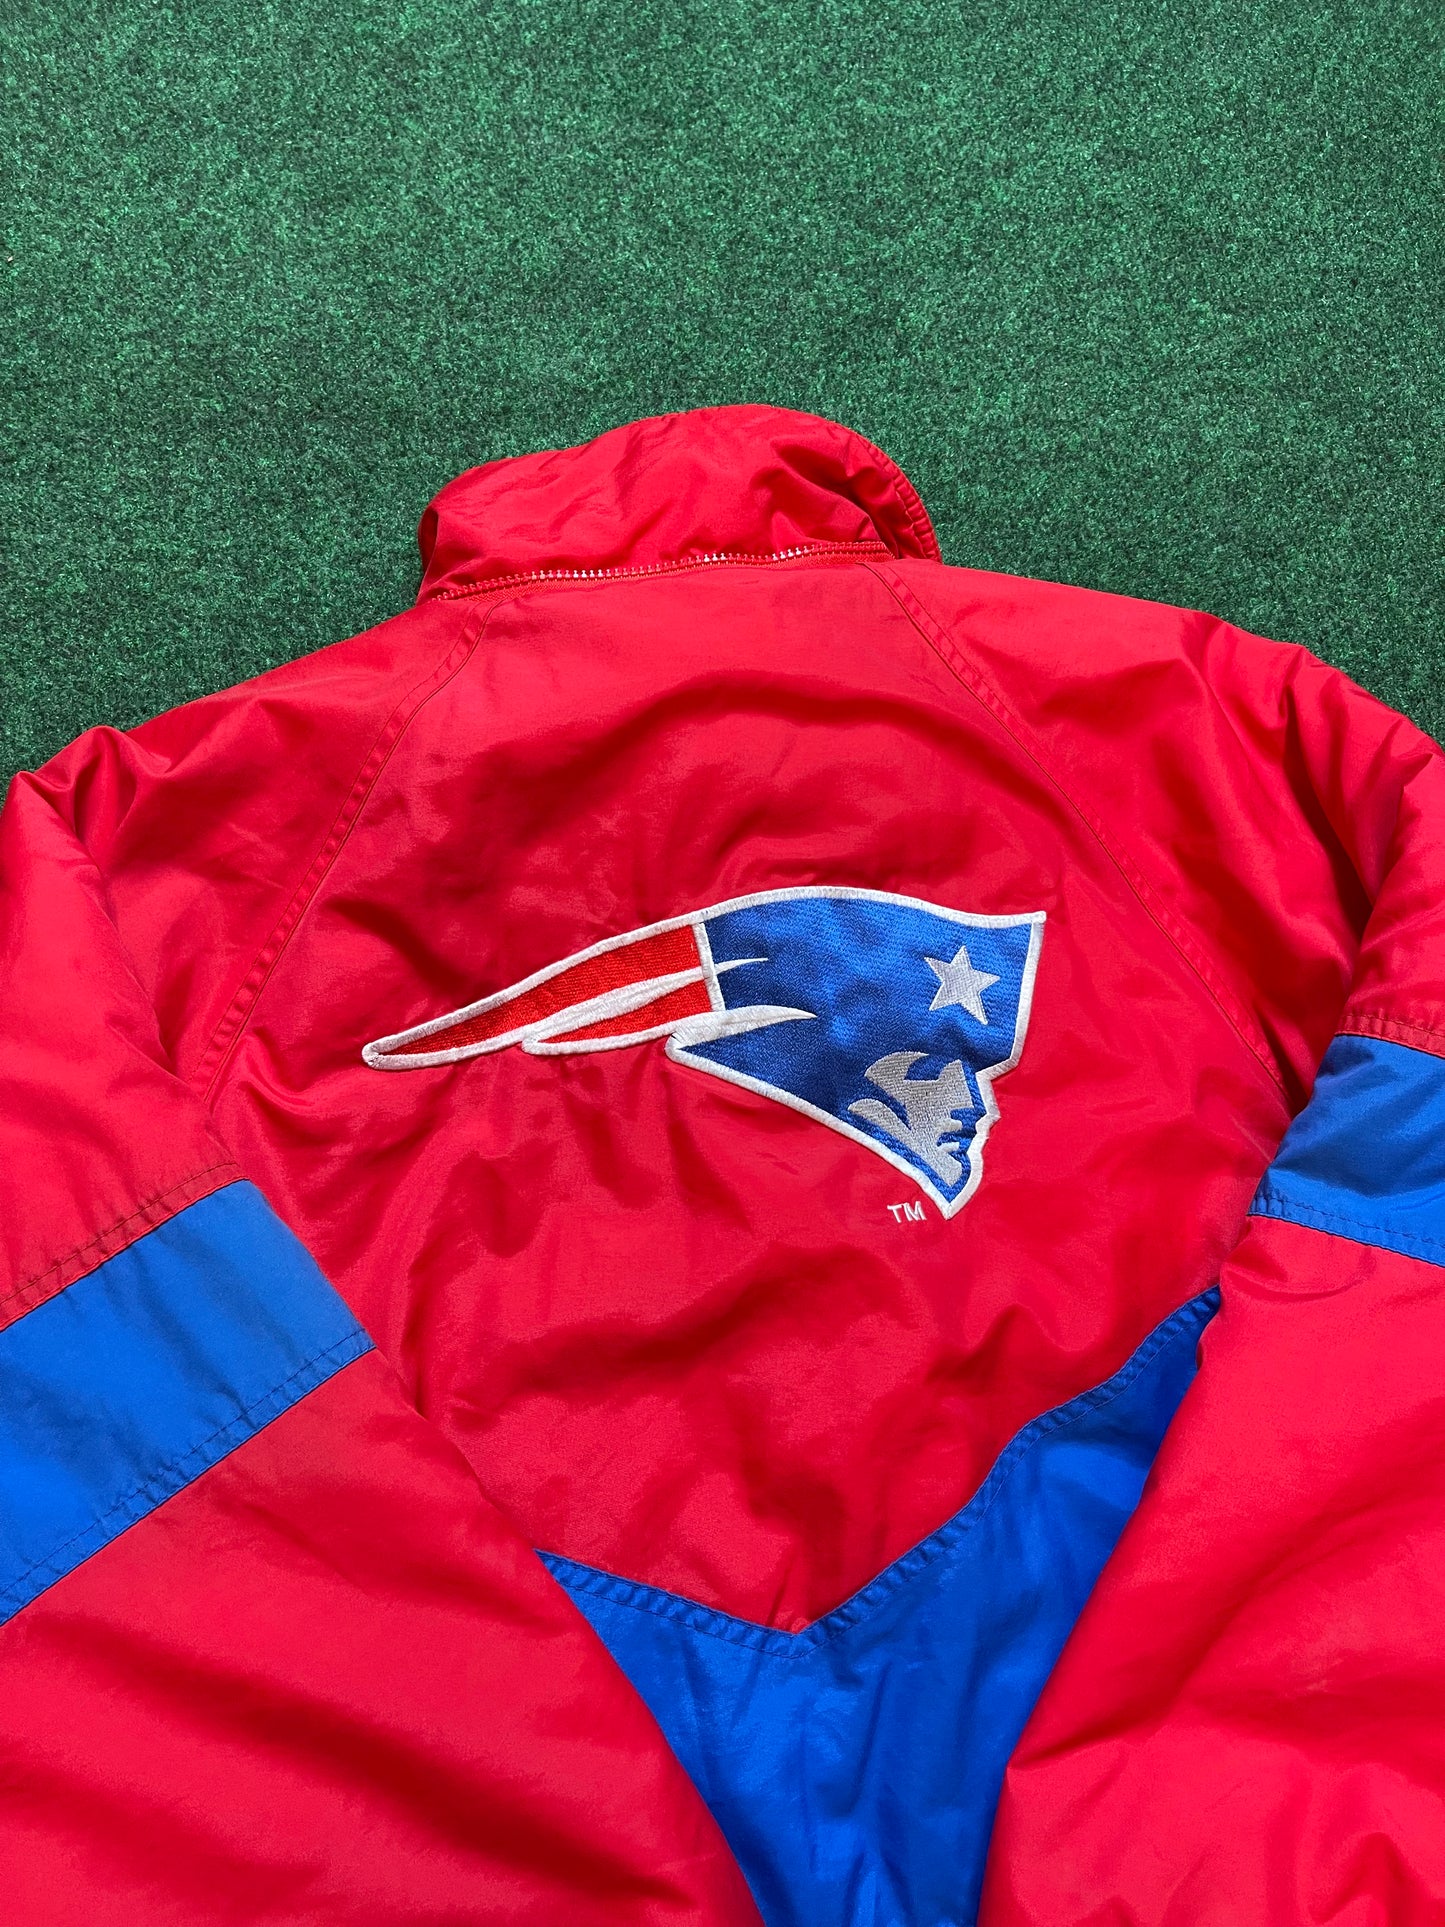 90’s New England Patriots Vintage NFL Trench Jacket (XL)